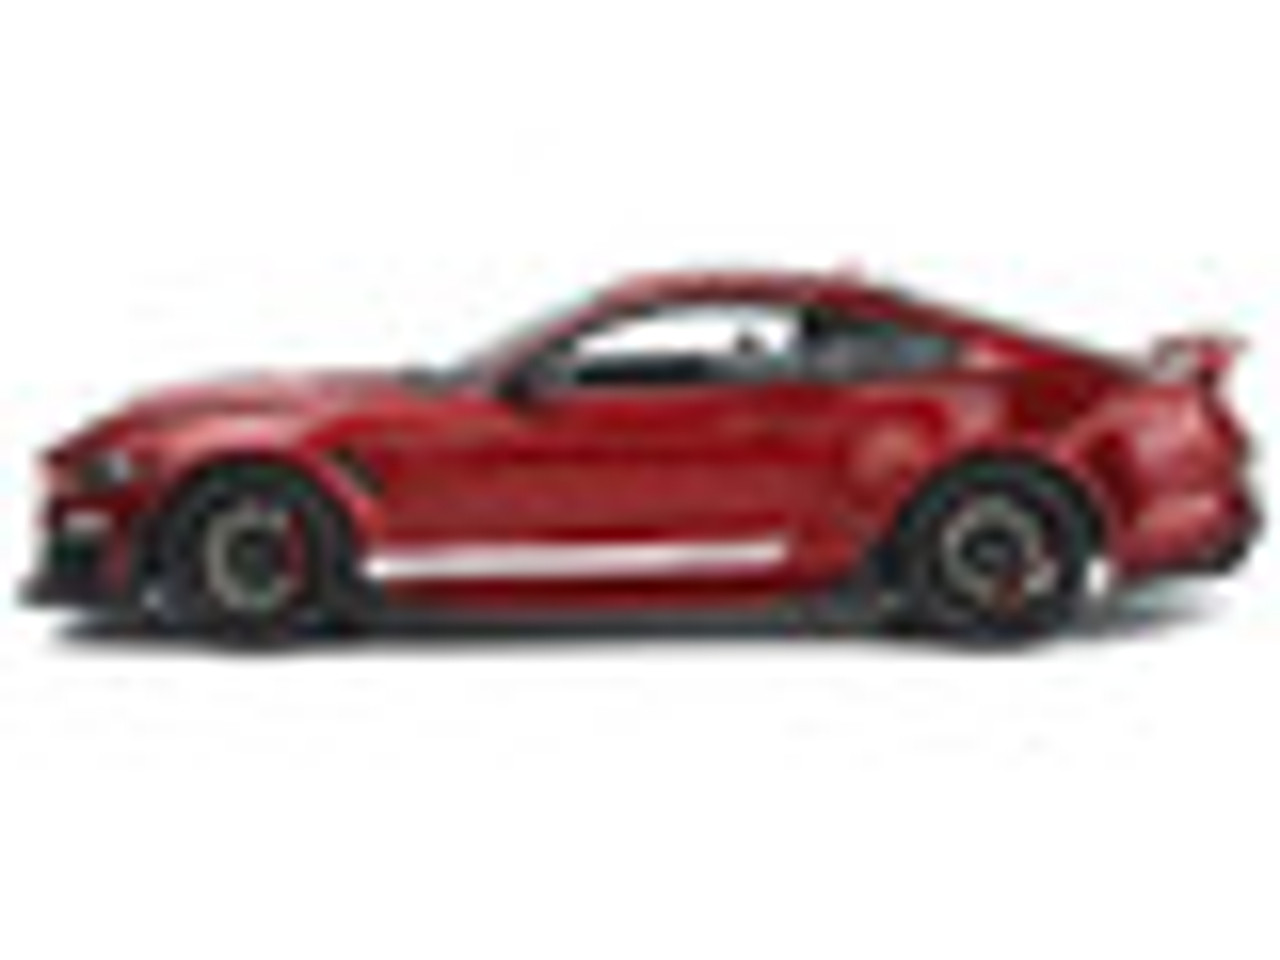 2021 Shelby Super Snake Coupe - Red Metallic with White Stripes - 1:18 Model Car by GT Spirit